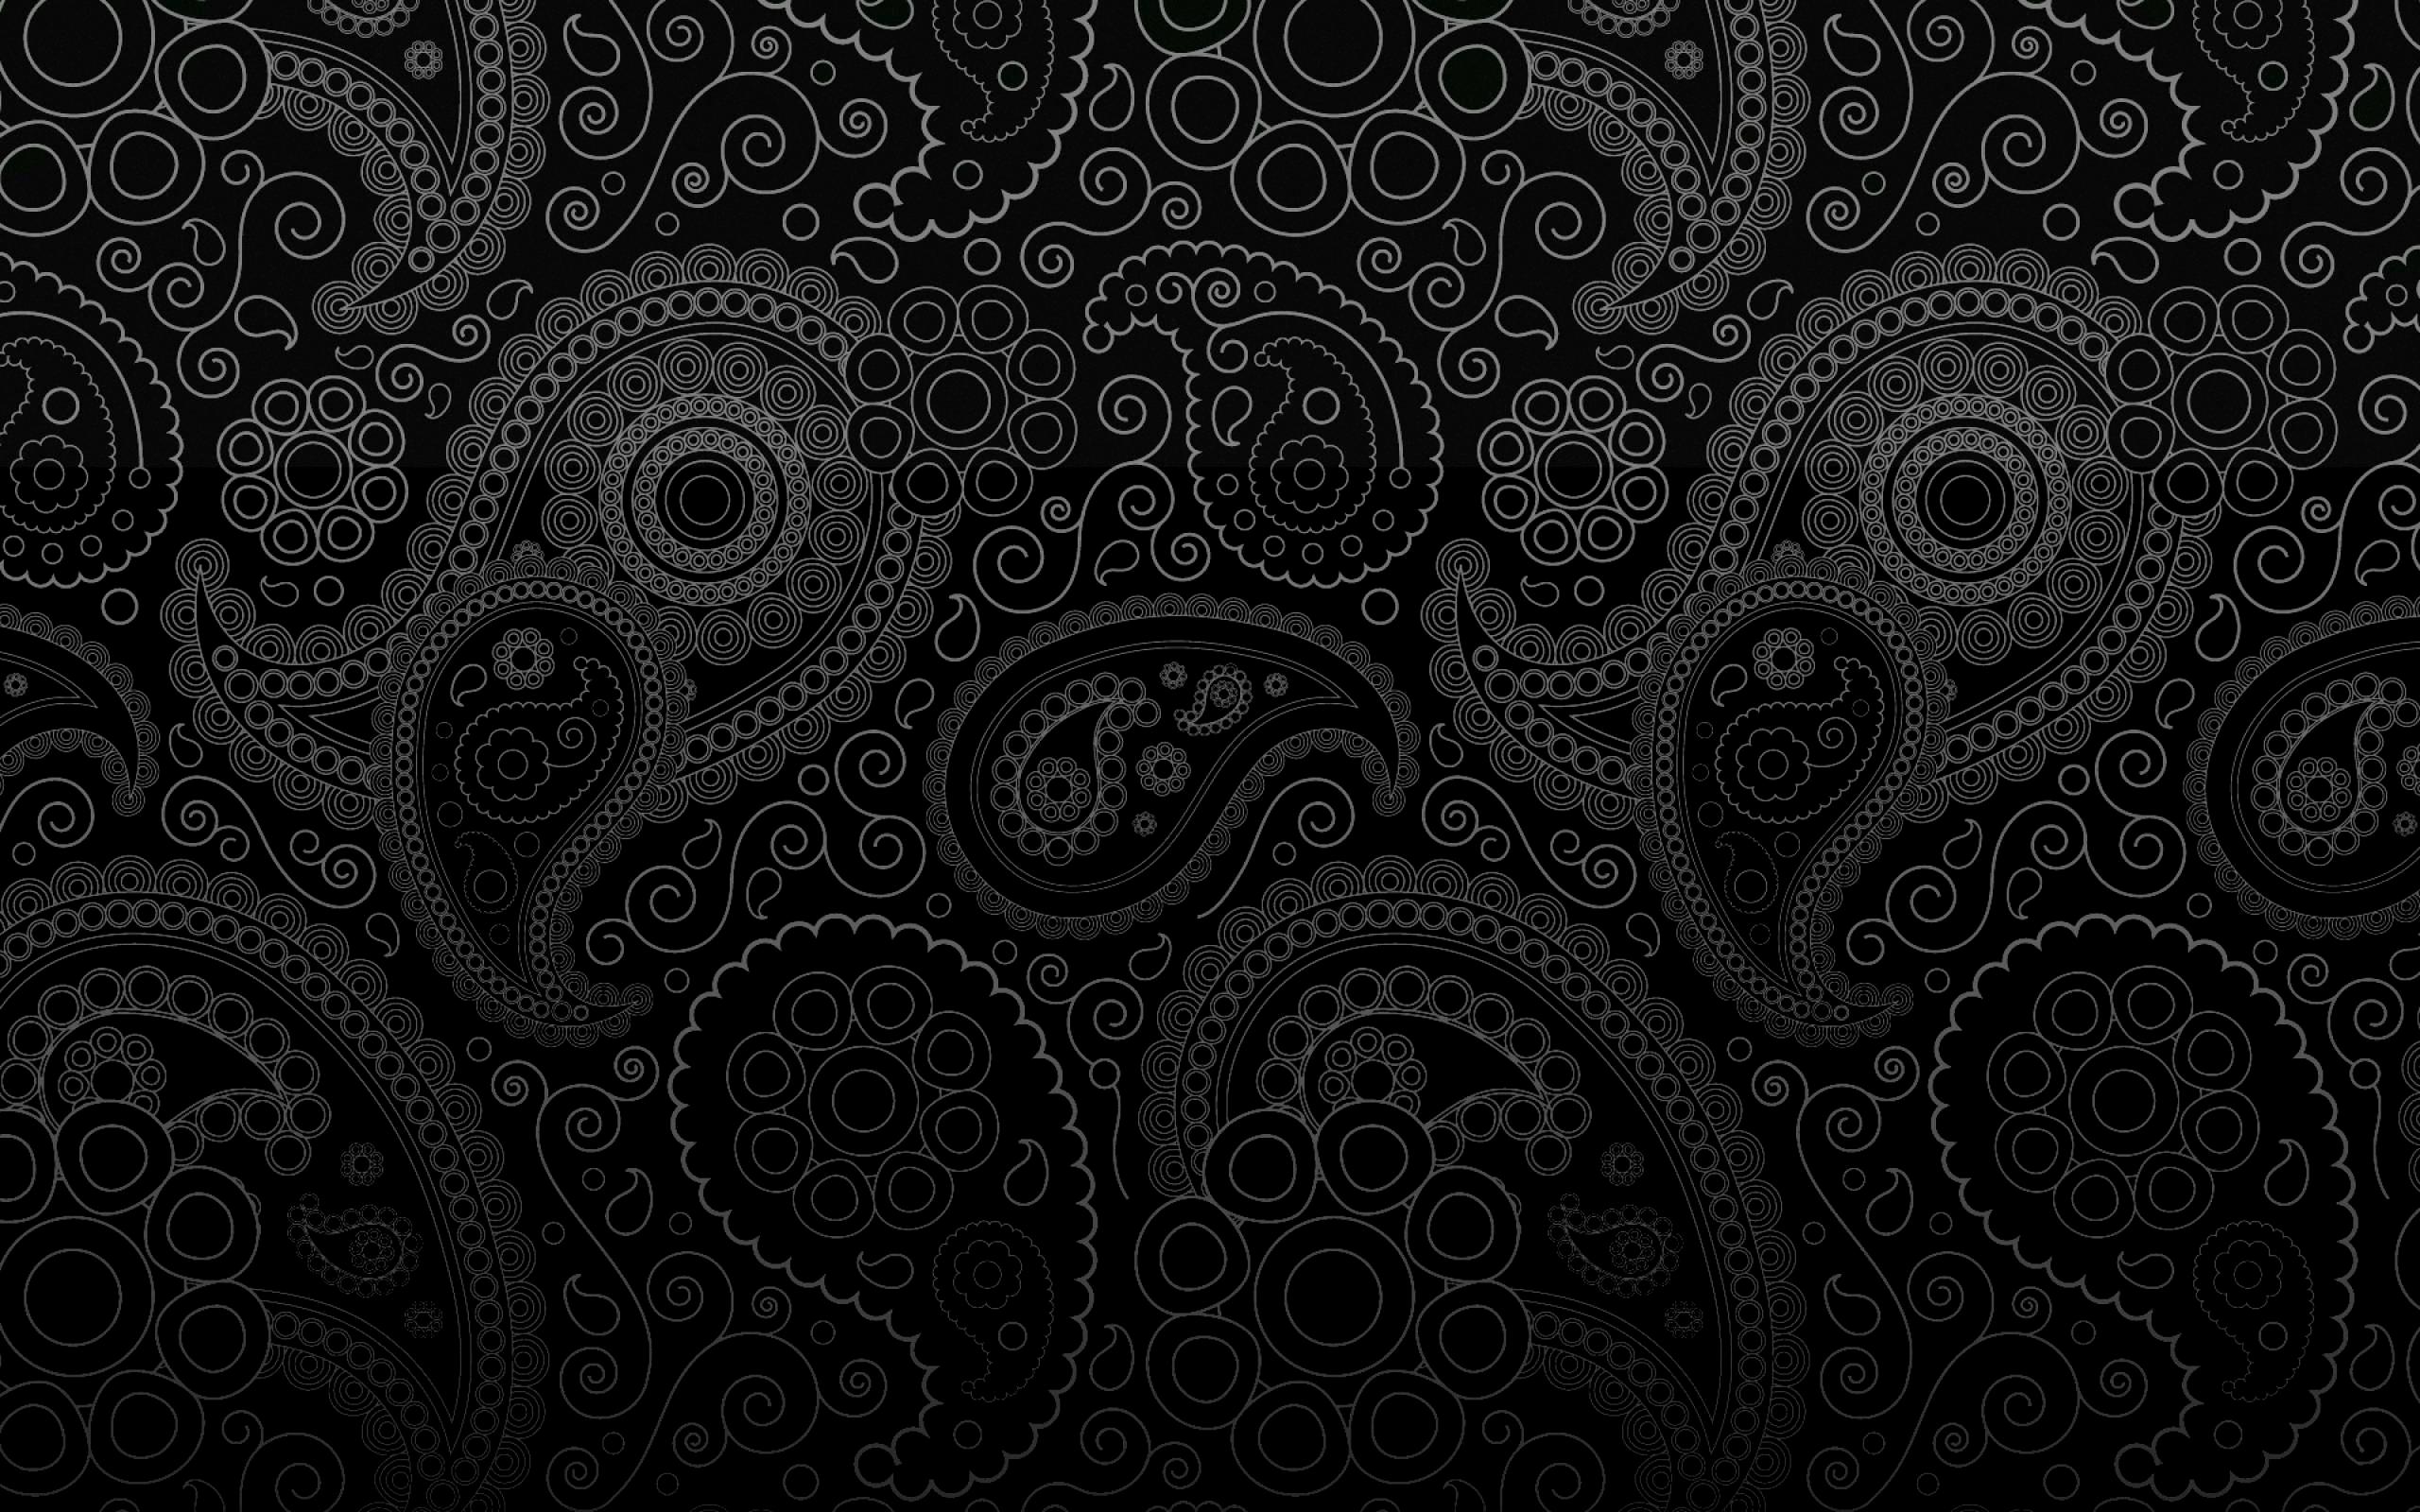 Android Wallpaper for AMOLED displays